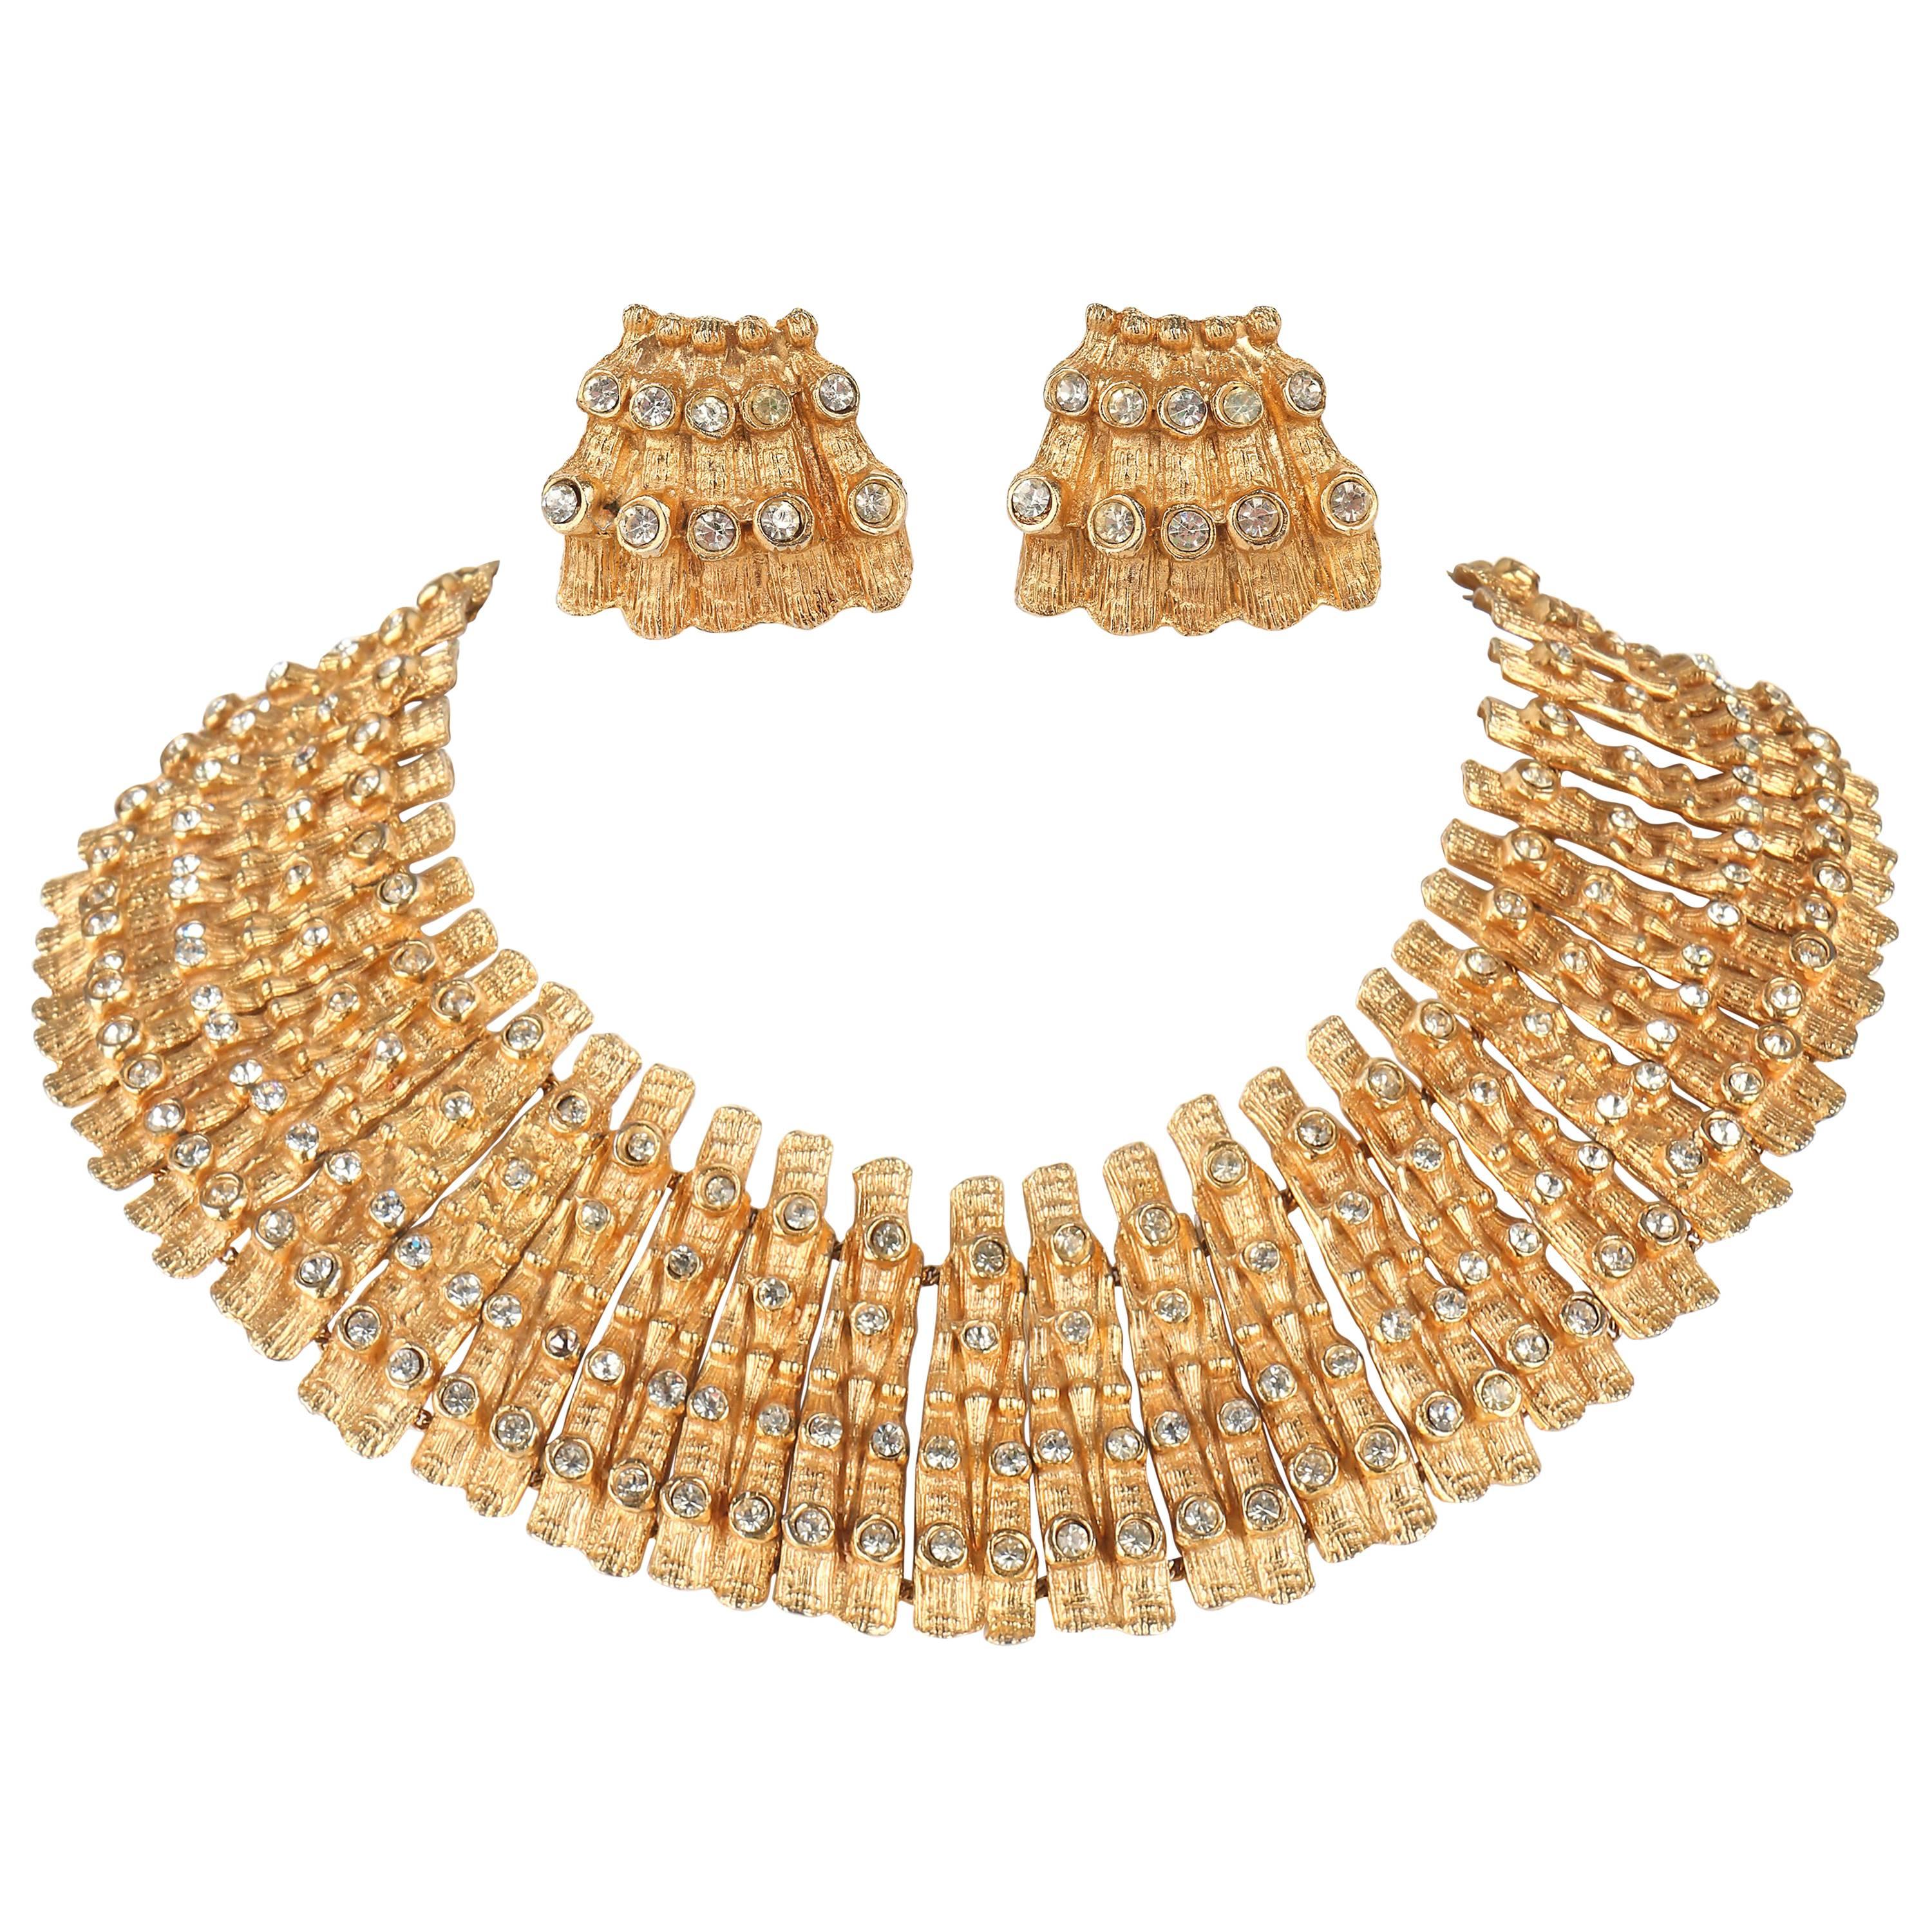 MOSELL c.1950's Egyptian Revival Gold Rhinestone Collar Necklace Earrings Set